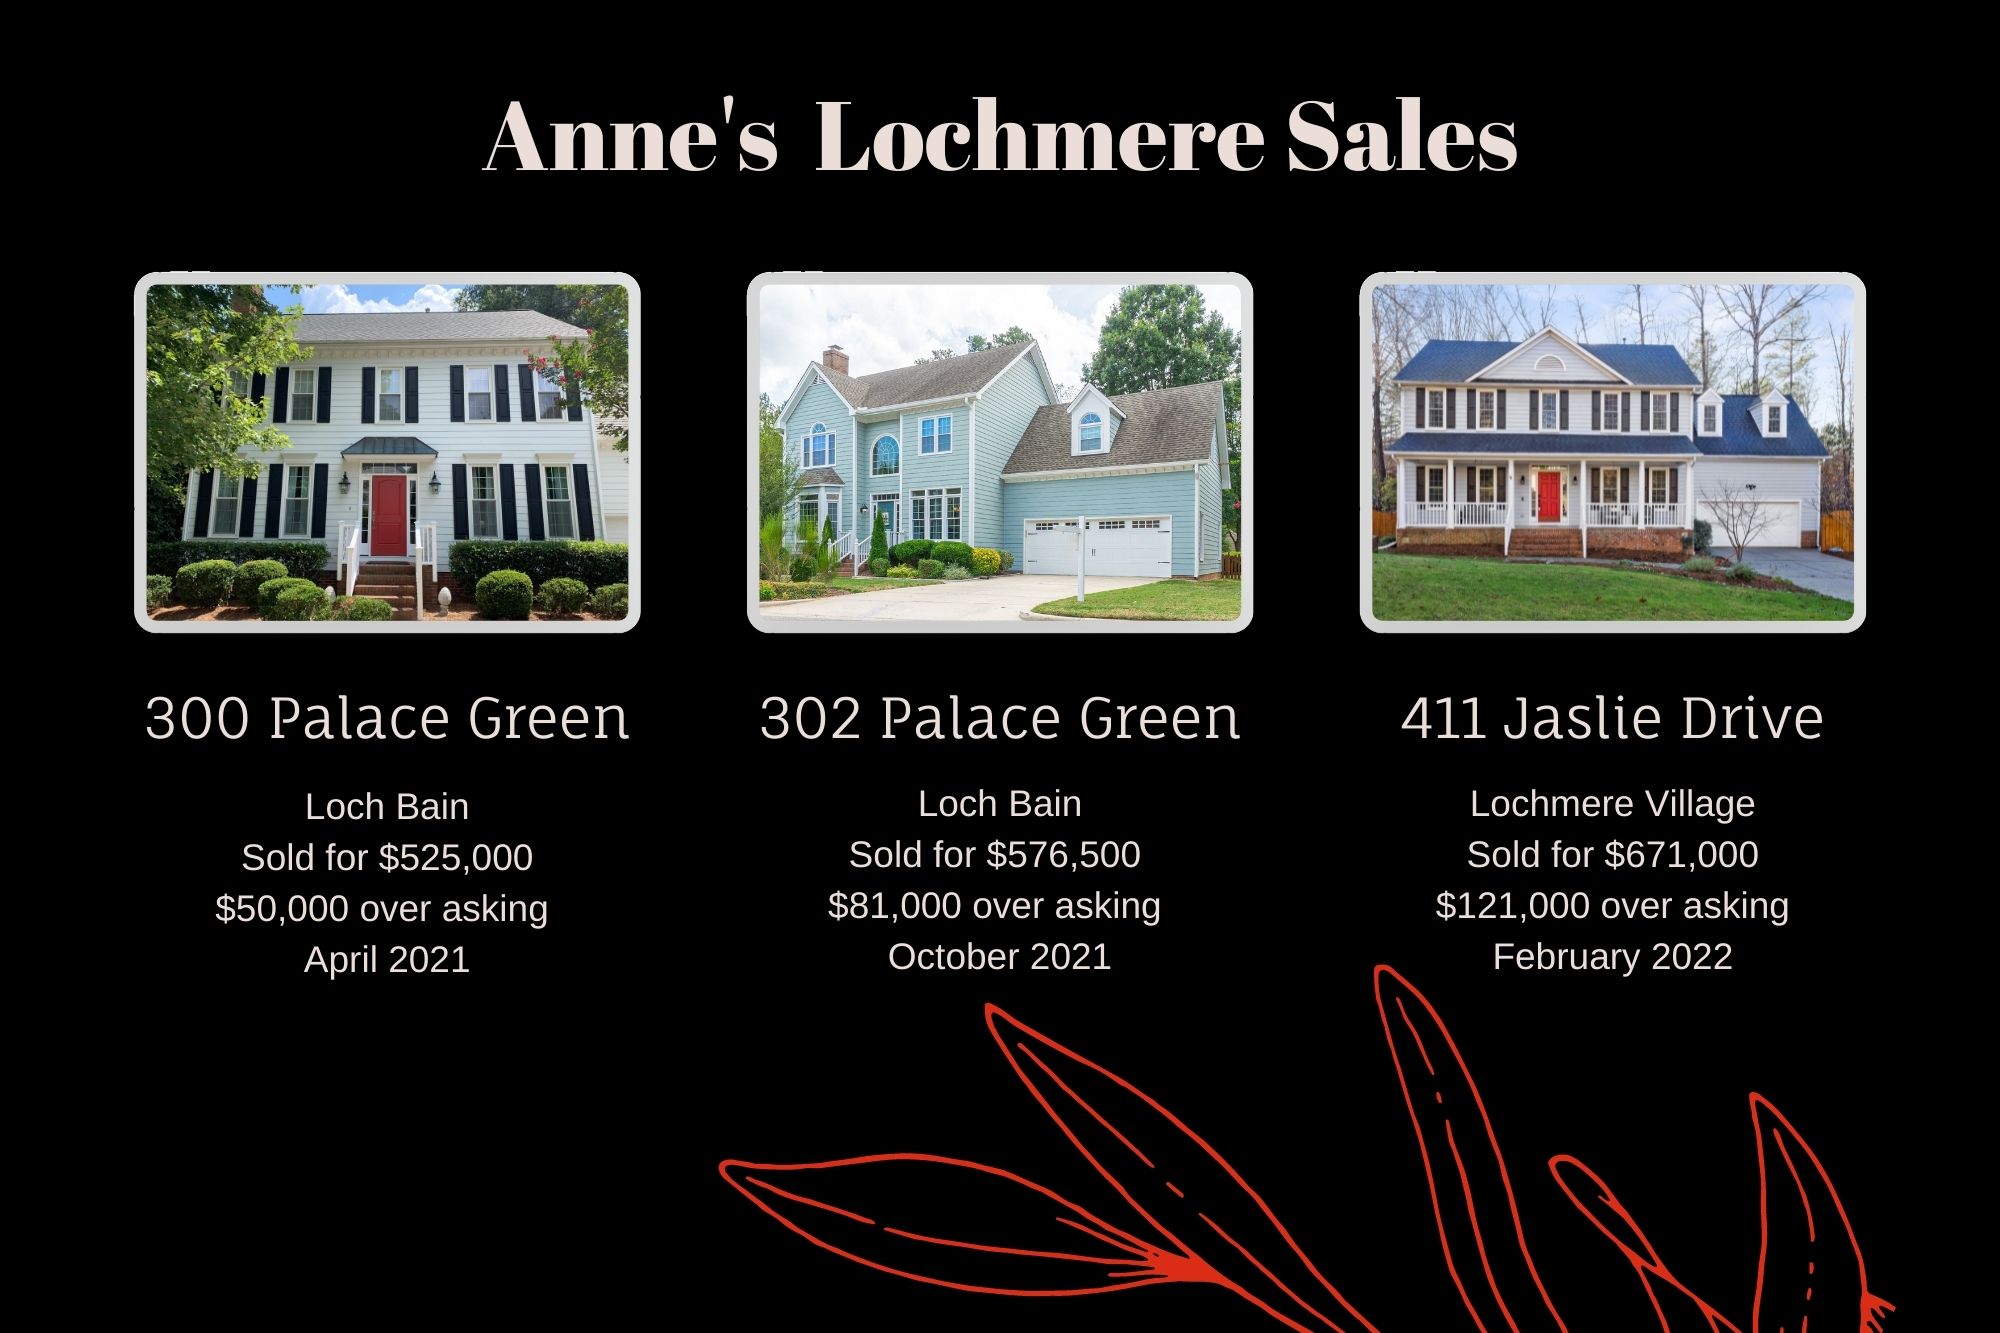 And Lochmere sales: 1) 300 Palace Green in Lock Bain sold for $525,000; $50,000 over asking April 2021. 2) 302 Palace Green in Loch Bain sold for $576,500; $81,000 over asking October 2021. 3) 411 Jaslie Drive in Lochmere Village sold for $671,000; $121,000 over asking February 2022.